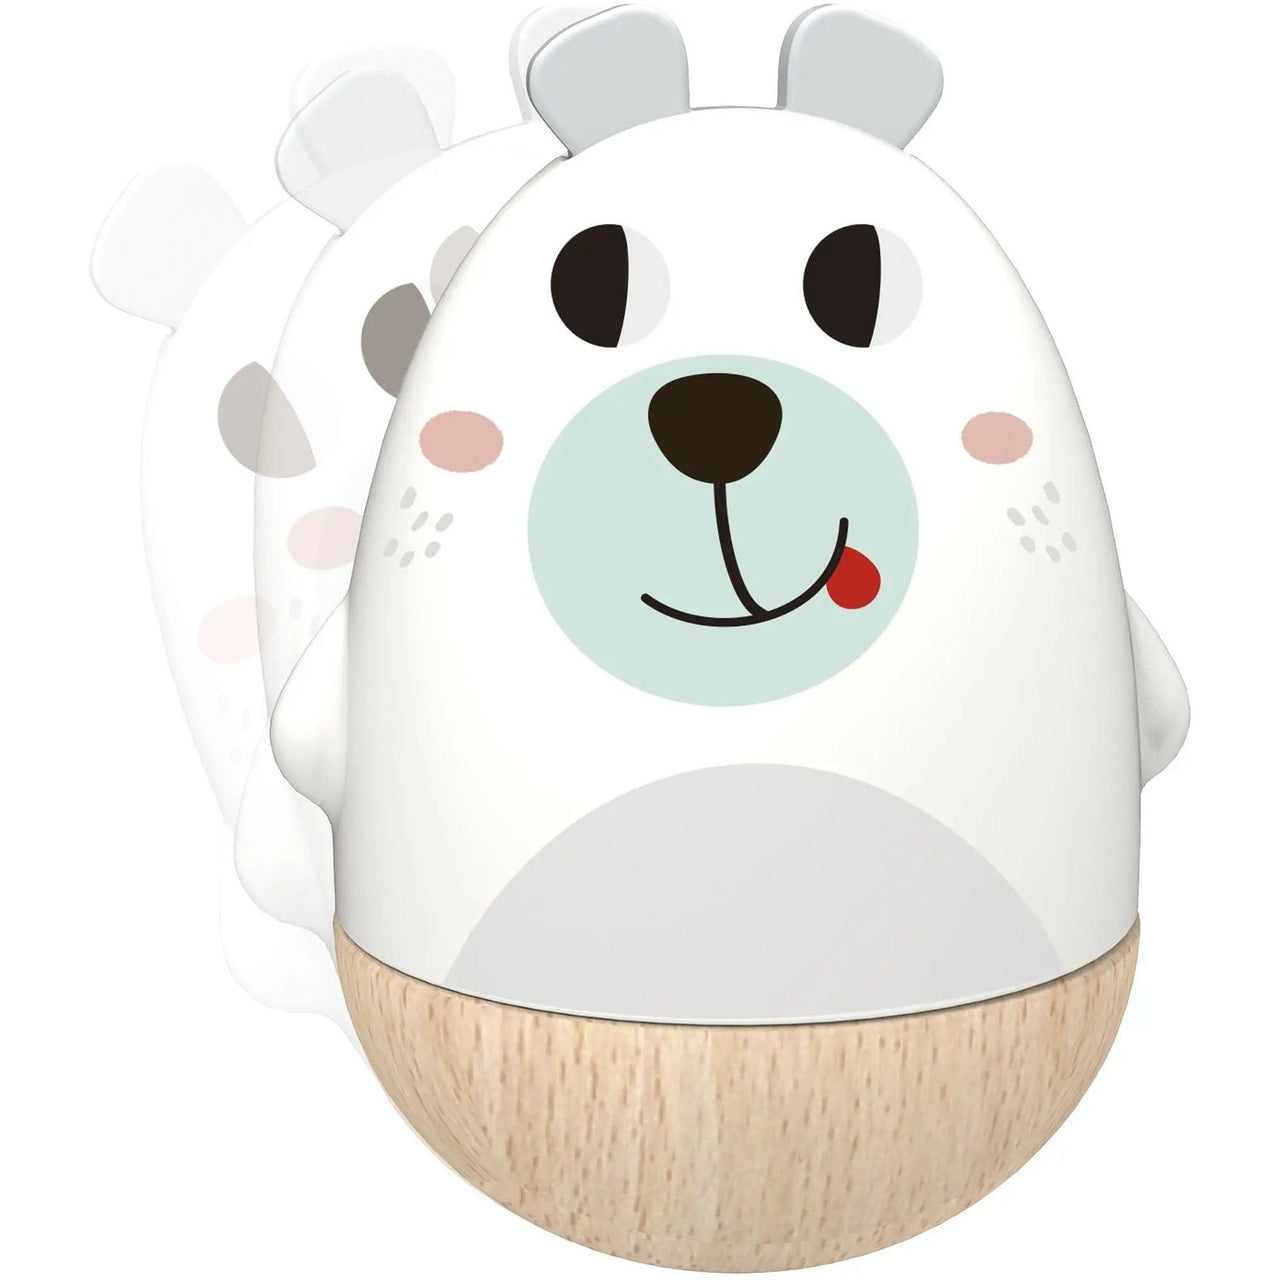 Tooky Toy Wooden Bear Musical Tumbler Tooky Toy